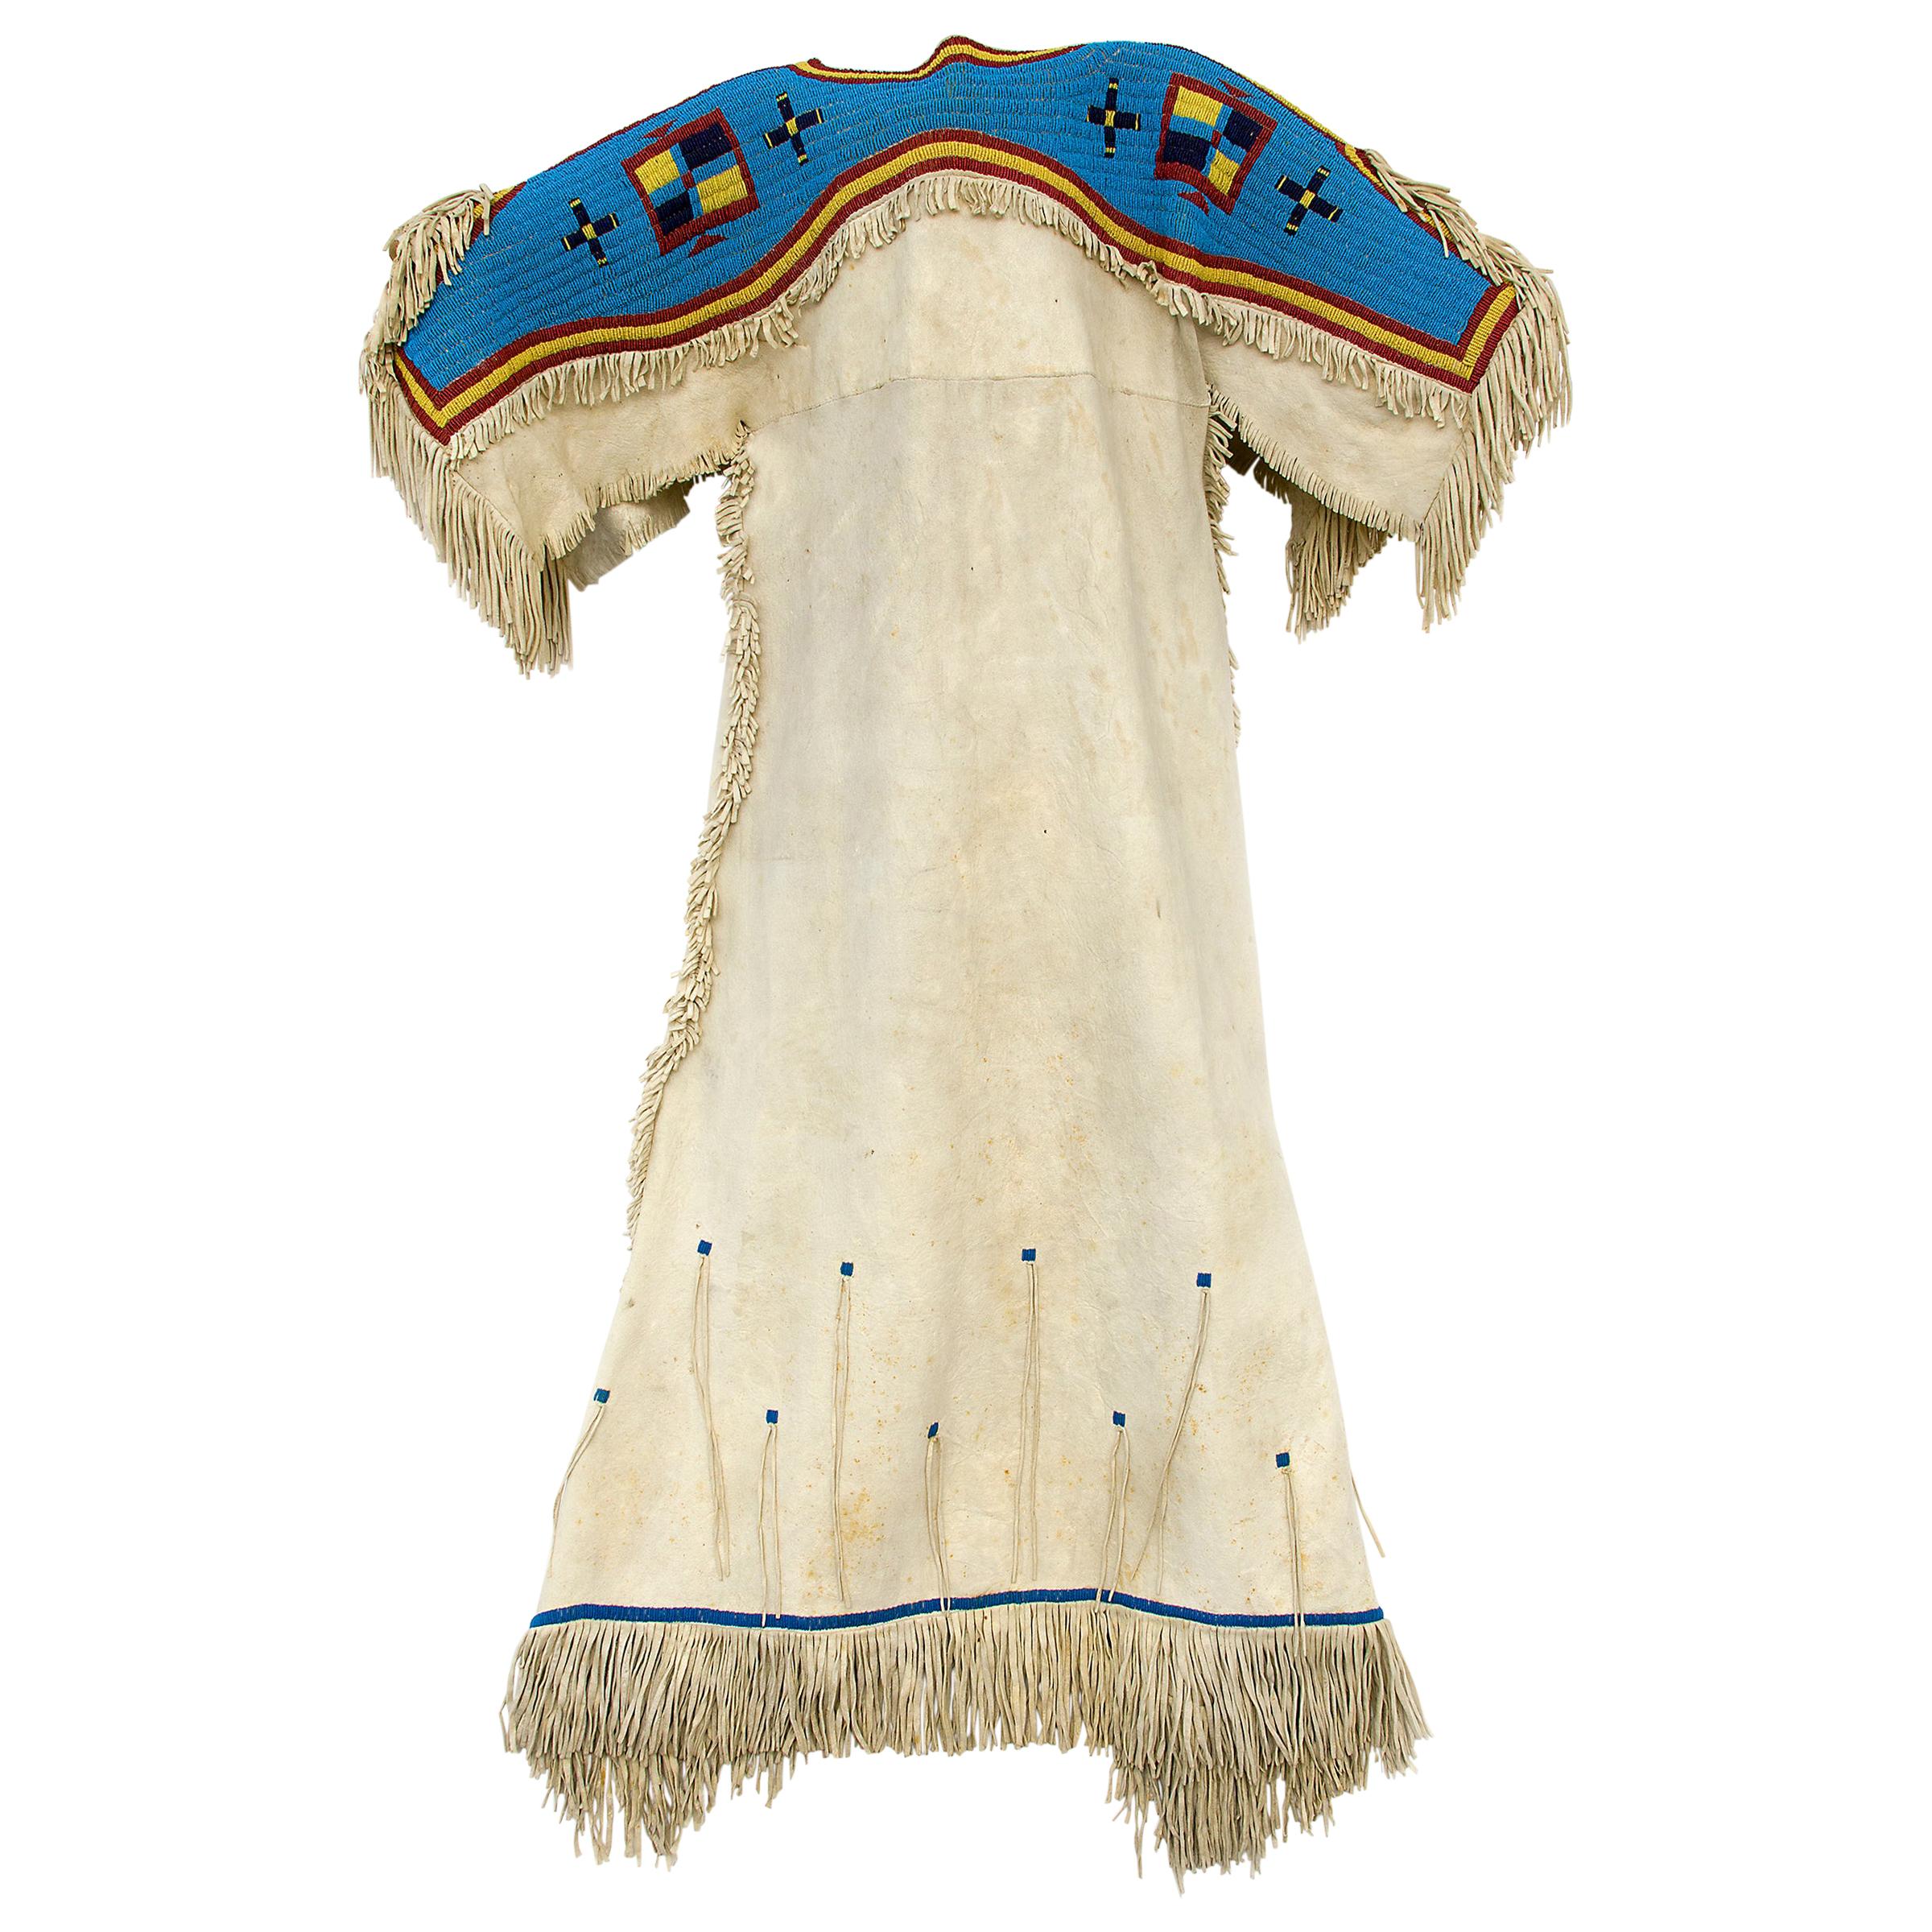 Antique Beaded Hide Dress, Sioux 'Plains Indian', circa 1880, Native American